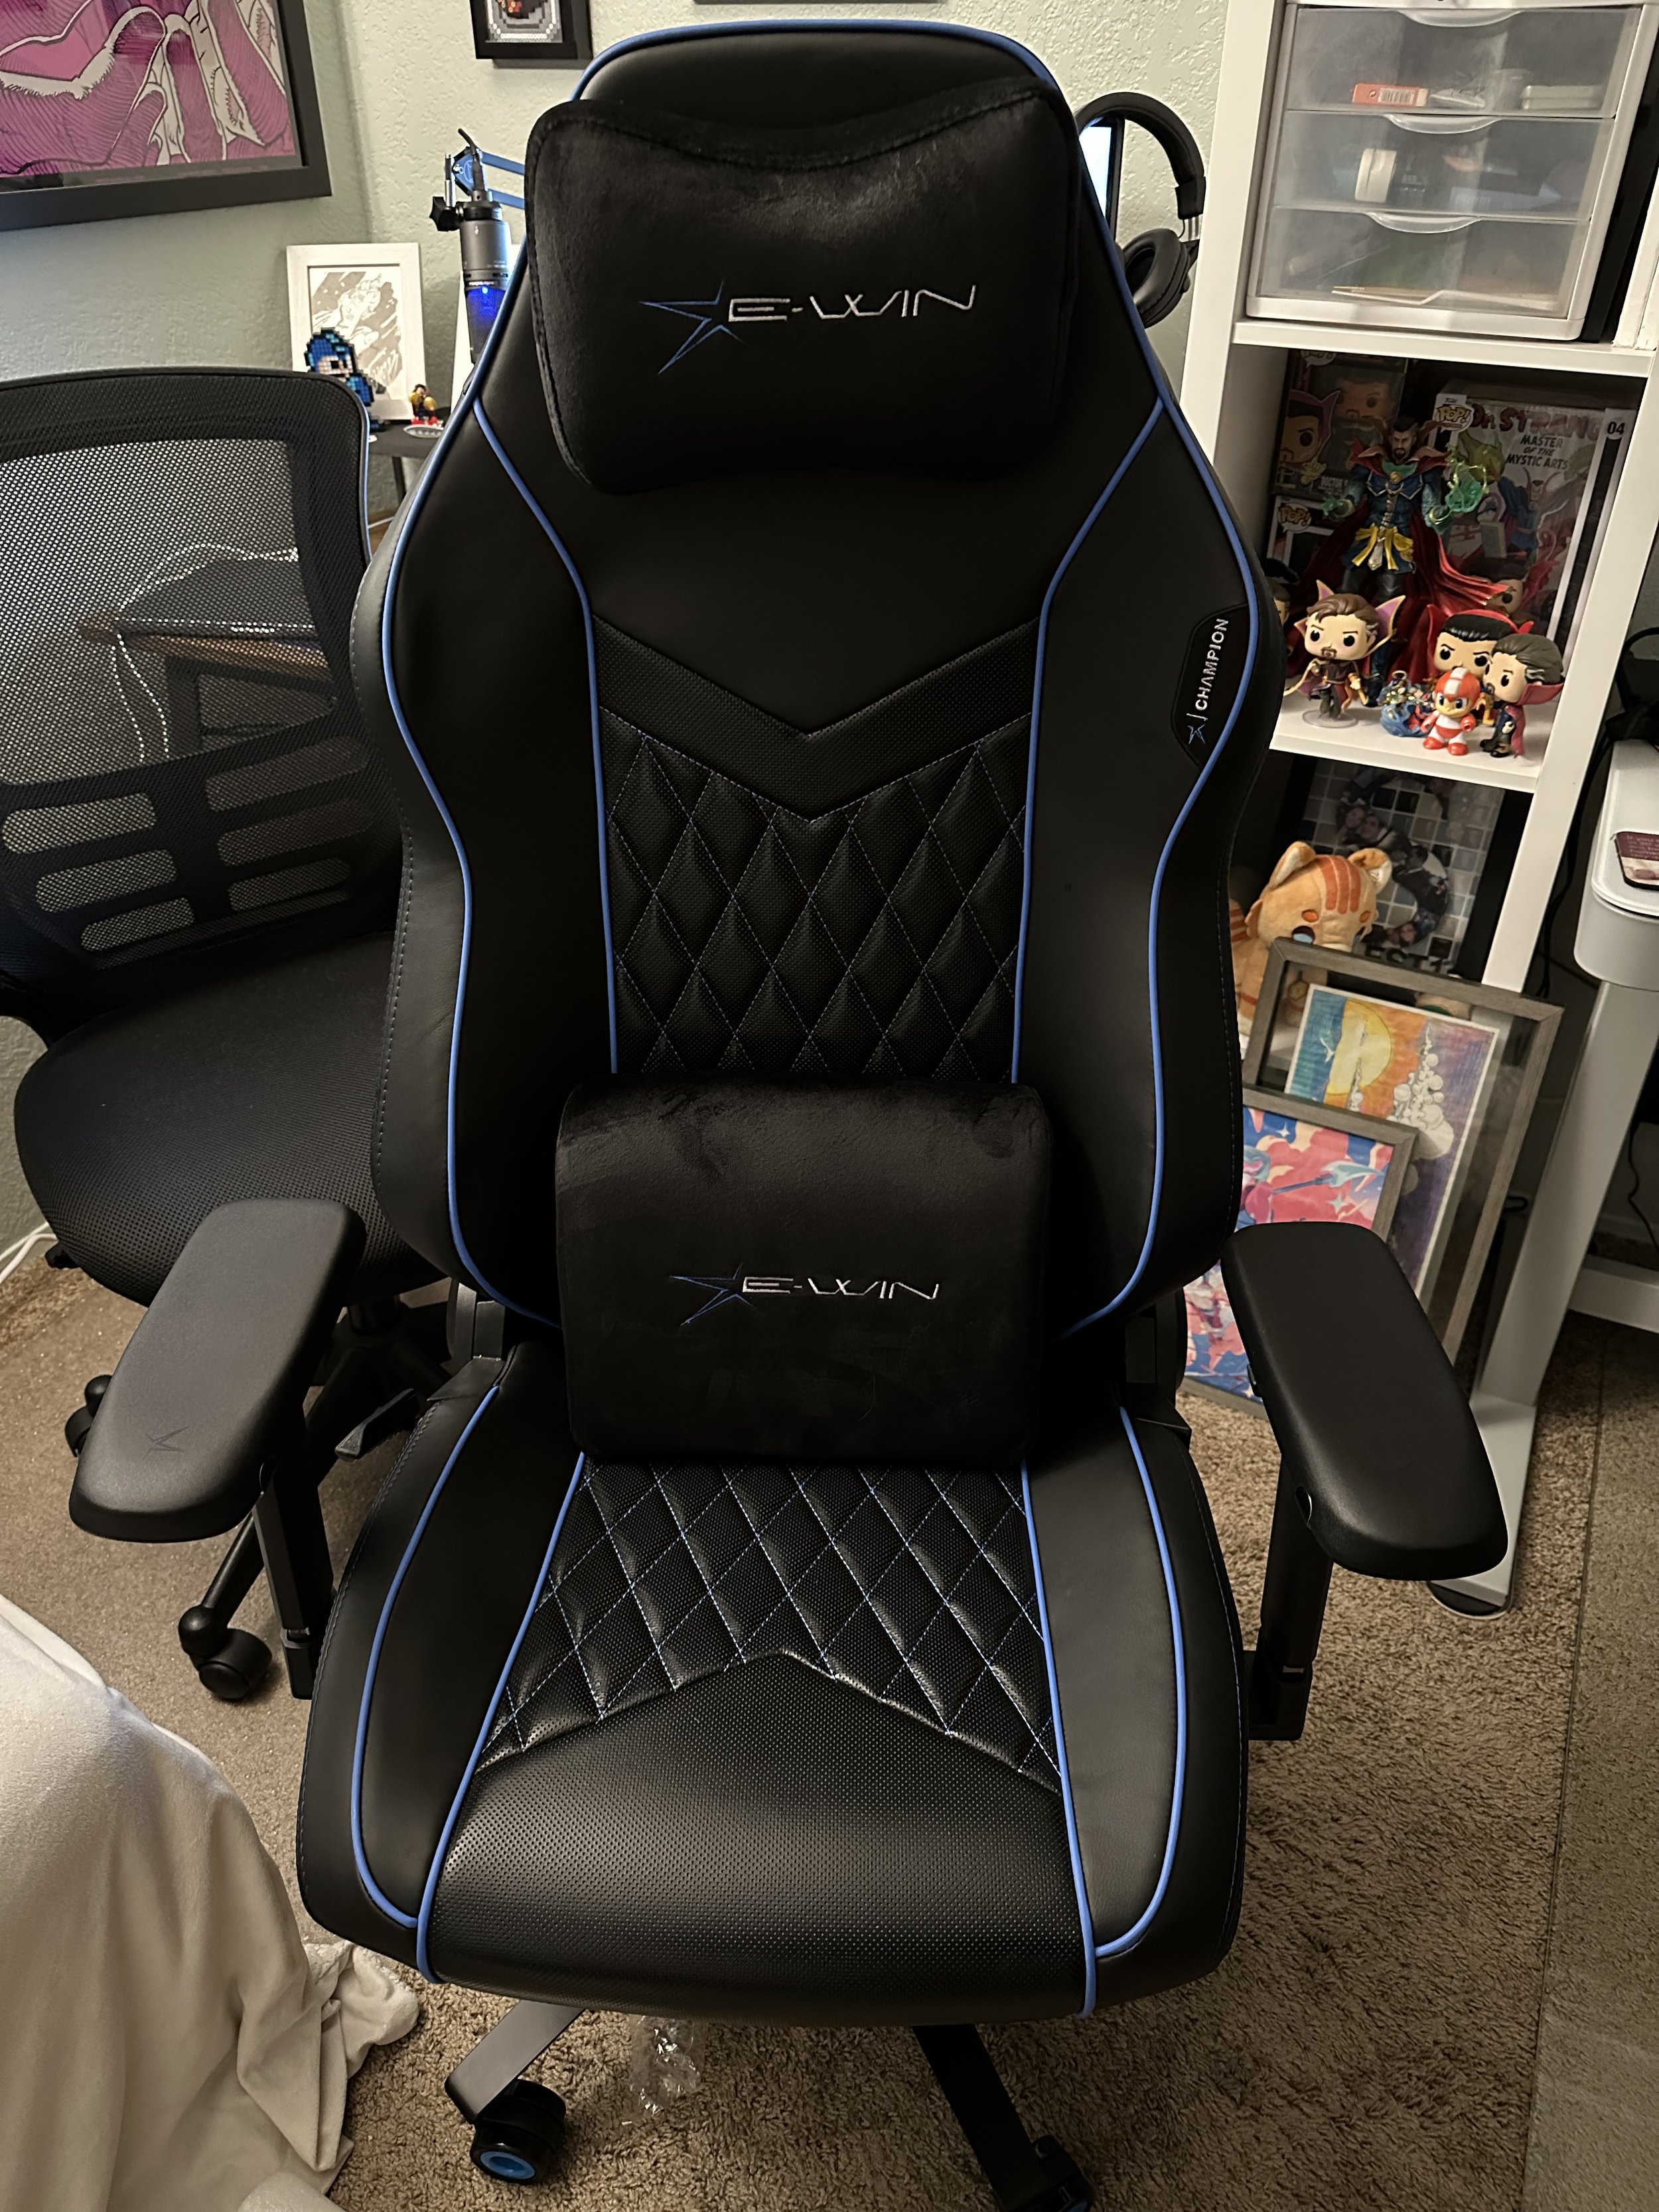 EwinRacing Champion Series Chair Review